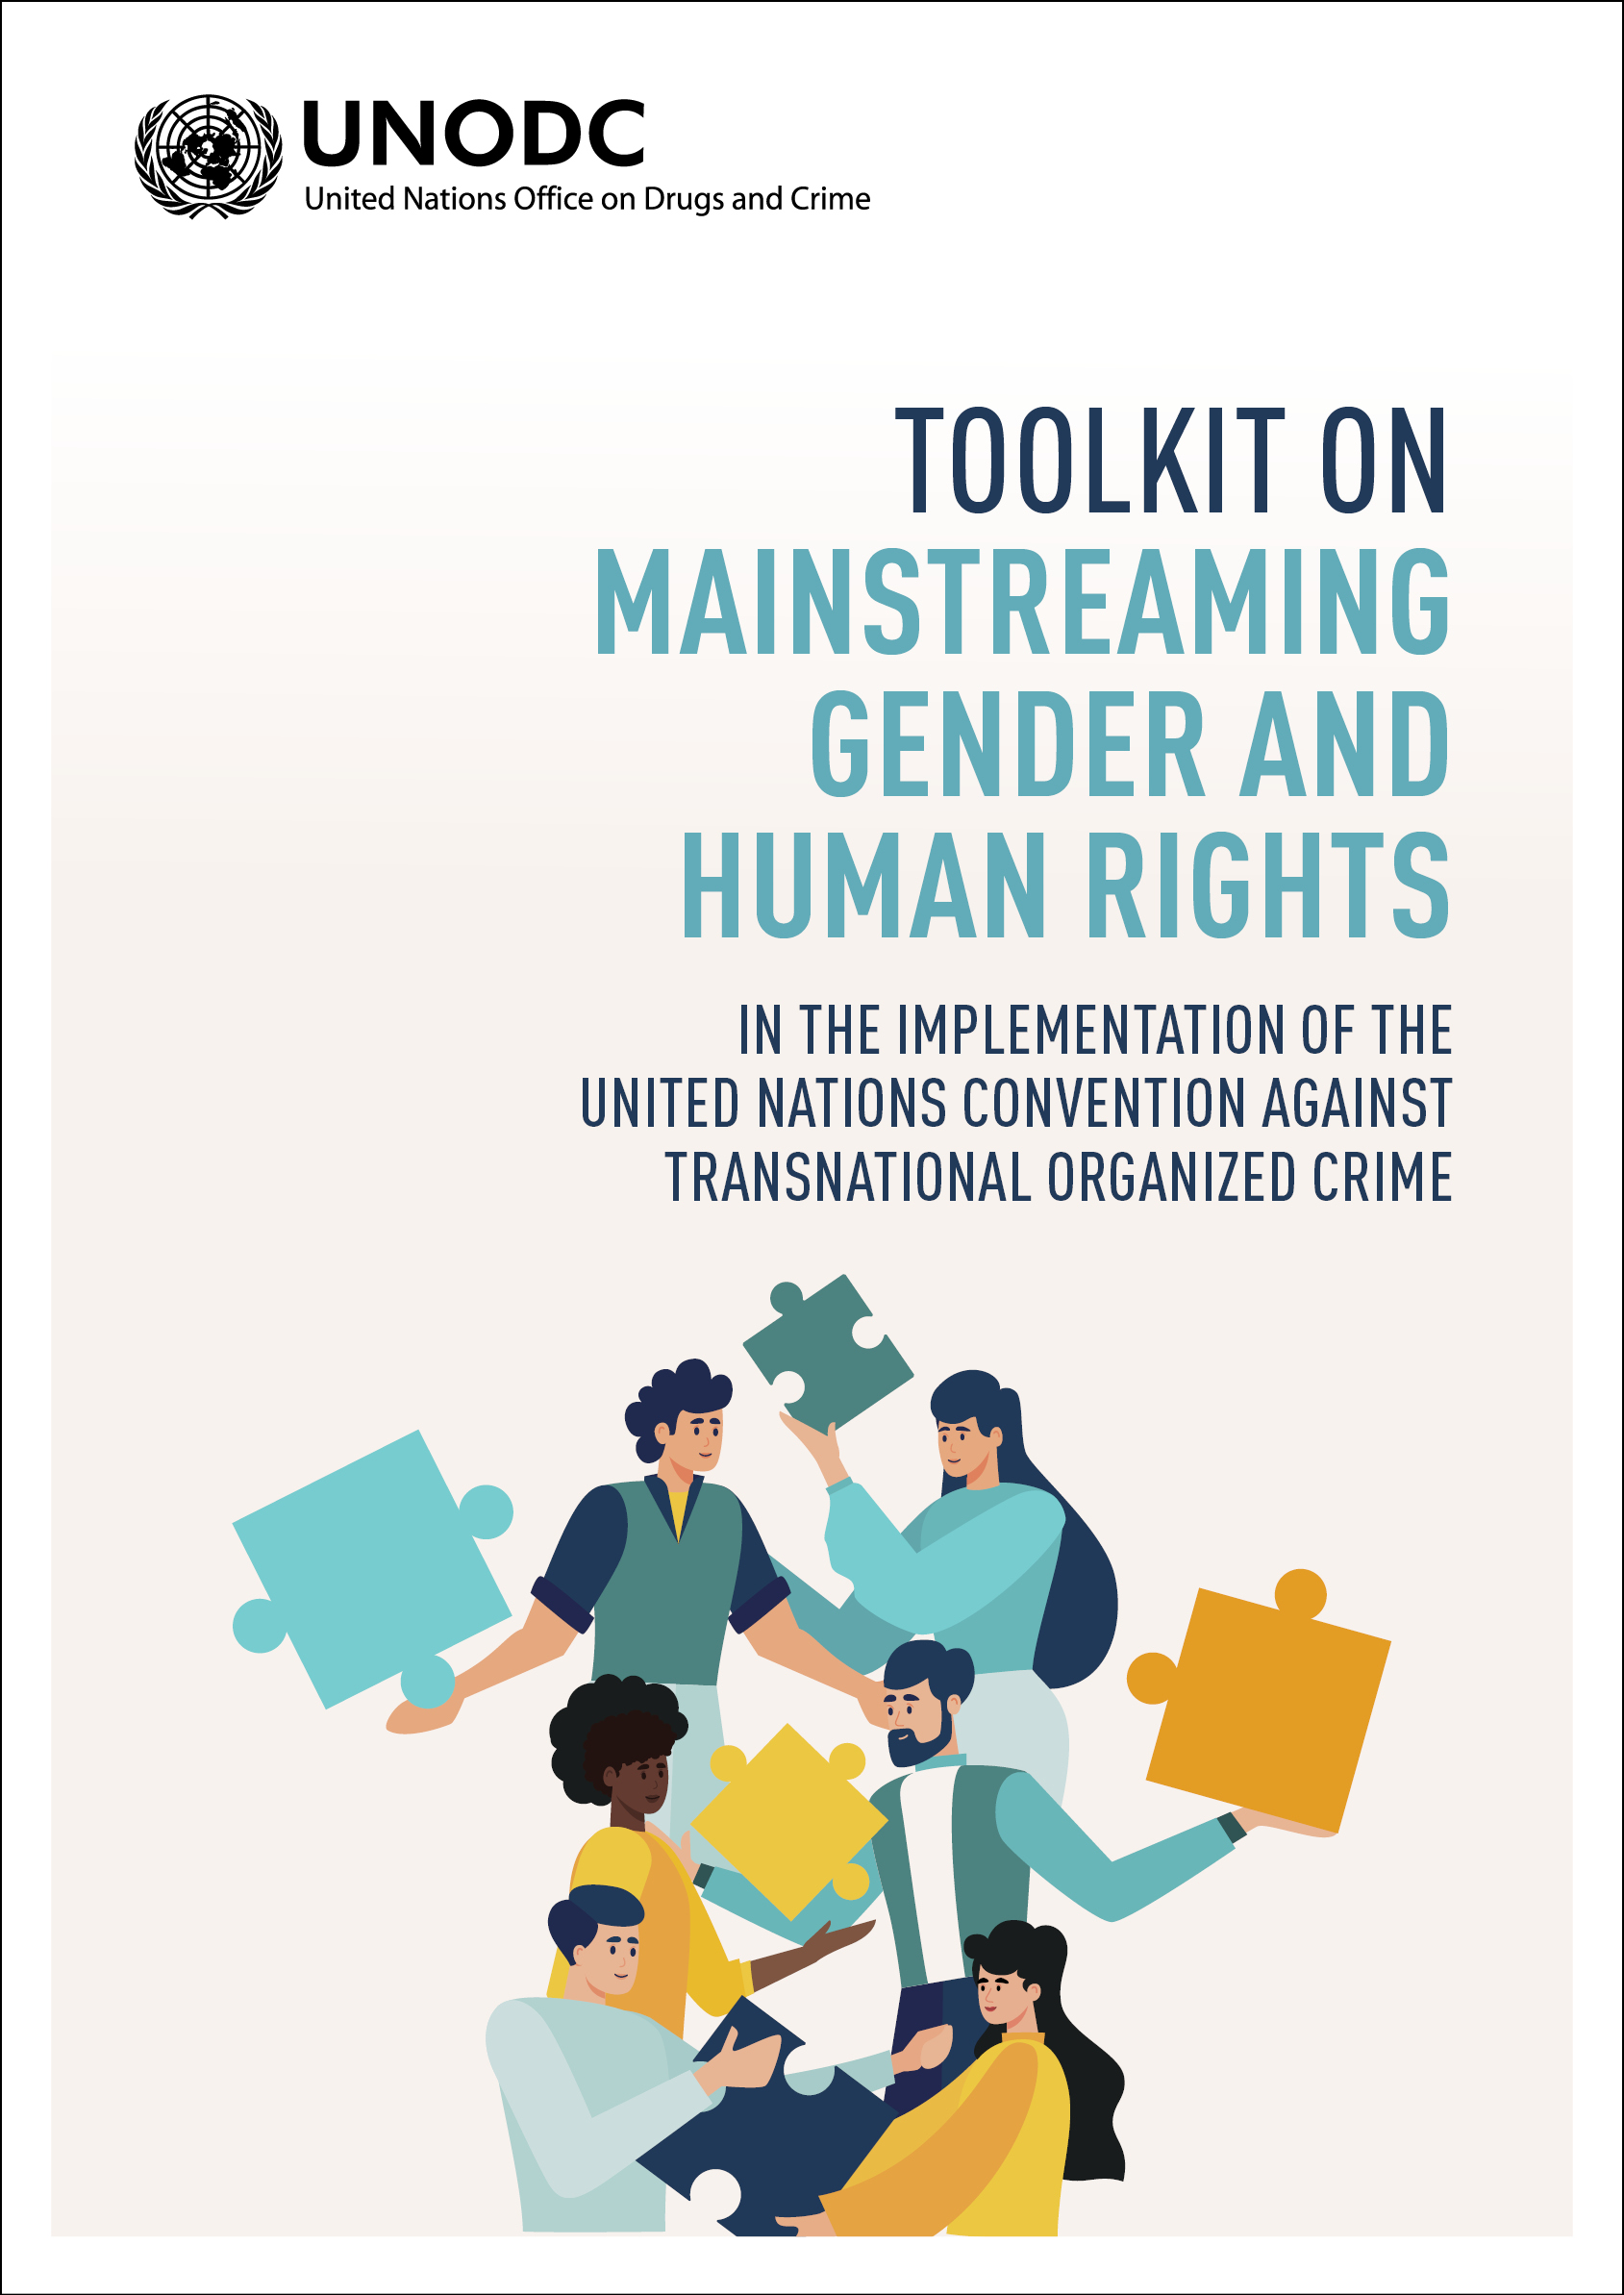 <div> </div>
<div style="text-align: center;">Toolkit on Mainstreaming Gender and Human Rights in the Implementation of the United Nations Convention against Transnational Organized Crime</div>
<div style="text-align: center;">(<a href="https://sherloc.unodc.org/cld/uploads/pdf/Tools_and_Publications/Toolkit-gender-_and_human_rights_mainstreaming-ebook-EN.pdf">E</a> - <a href="/cld/uploads/pdf/Toolkit_Gender_and_Human_Rights_Mainstreaming_French.pdf">F</a> - <a href="/cld/uploads/pdf/Toolkit_Gender_and_Human_Rights_Mainstreaming_Russian.pdf">R</a> - <a href="/cld/uploads/pdf/Toolkit_Gender_and_Human_Rights_Mainstreaming_Spanish.pdf">S</a>)</div>